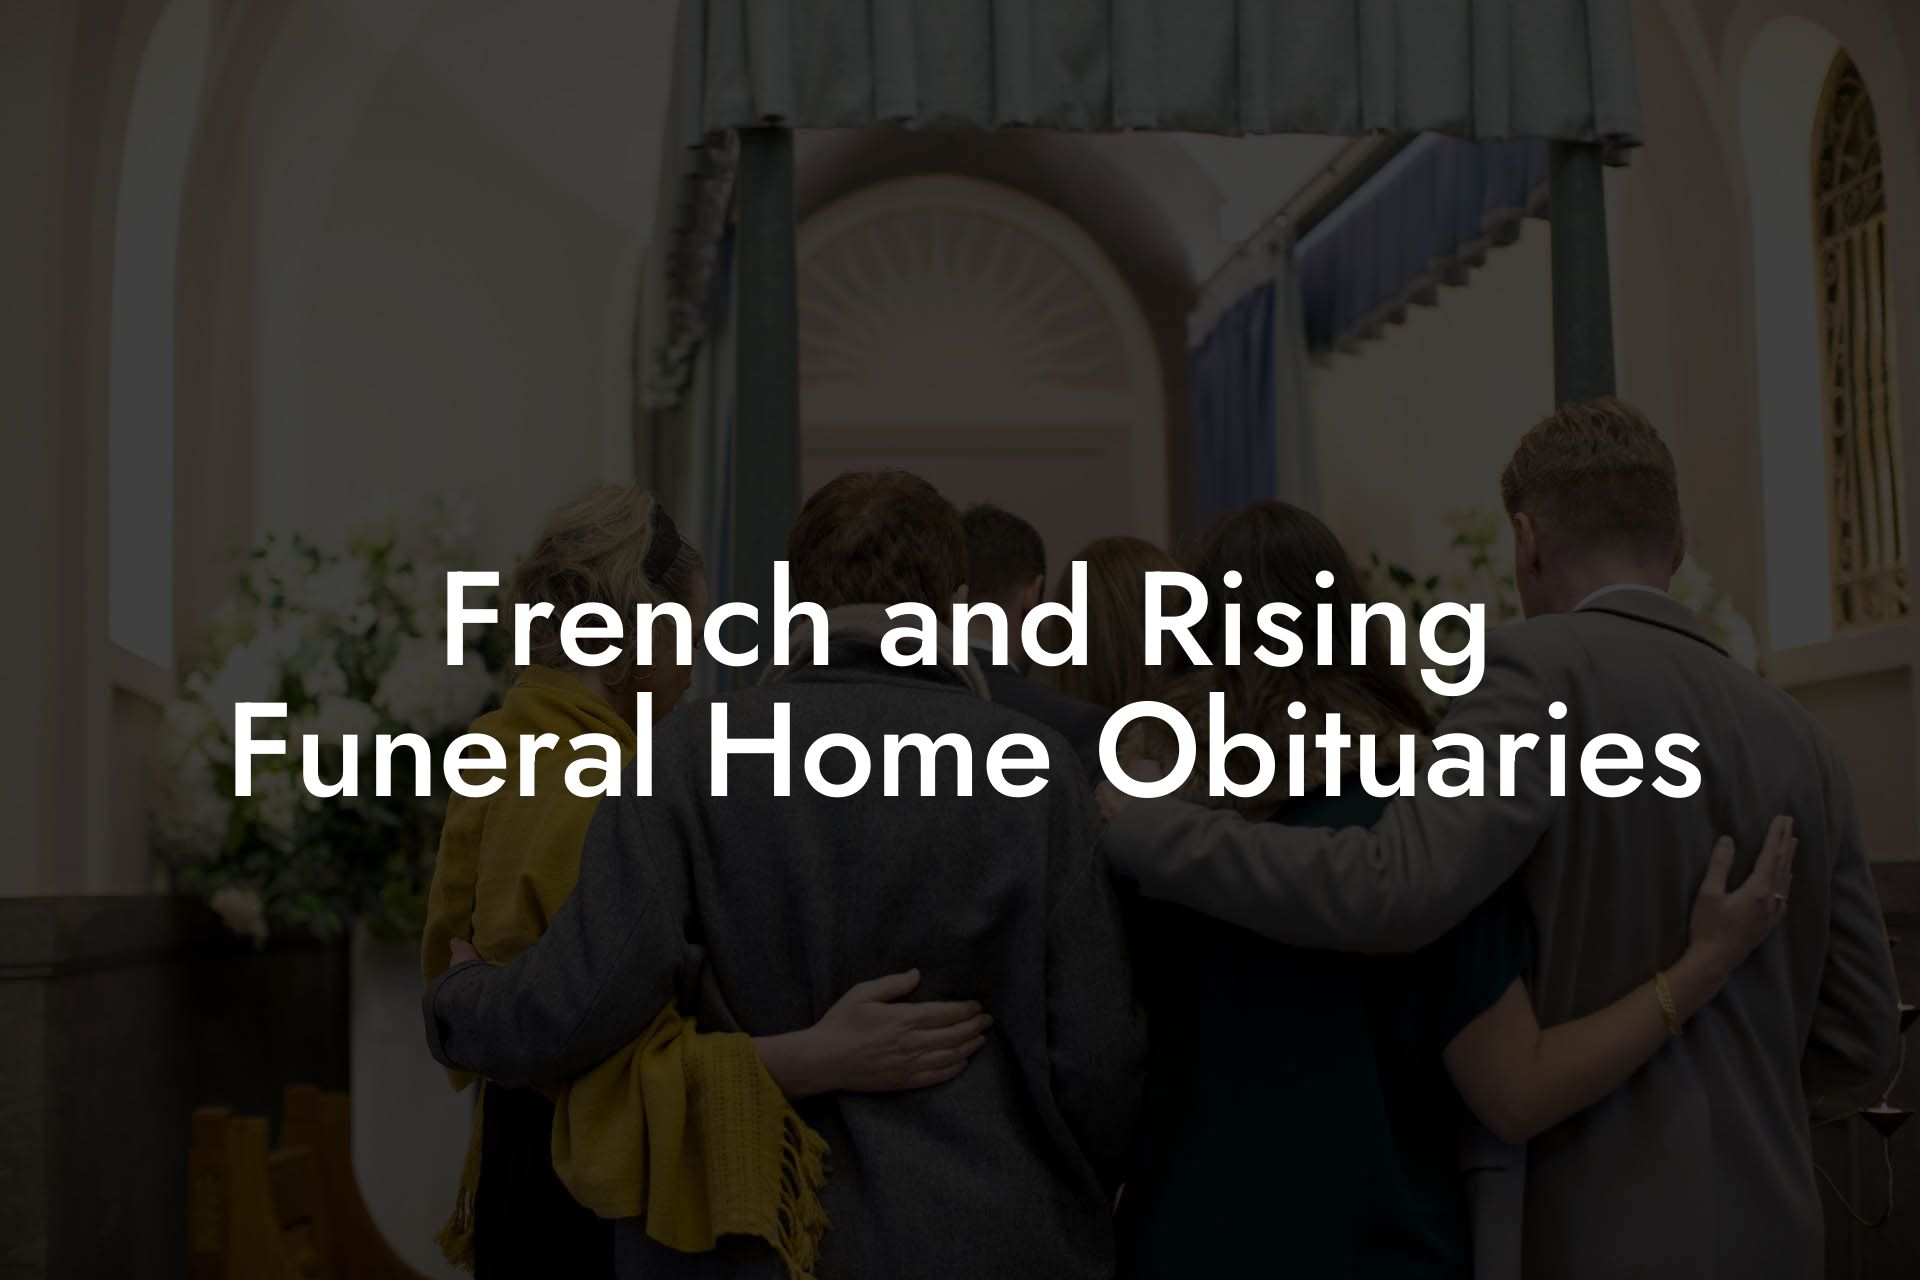 French and Rising Funeral Home Obituaries